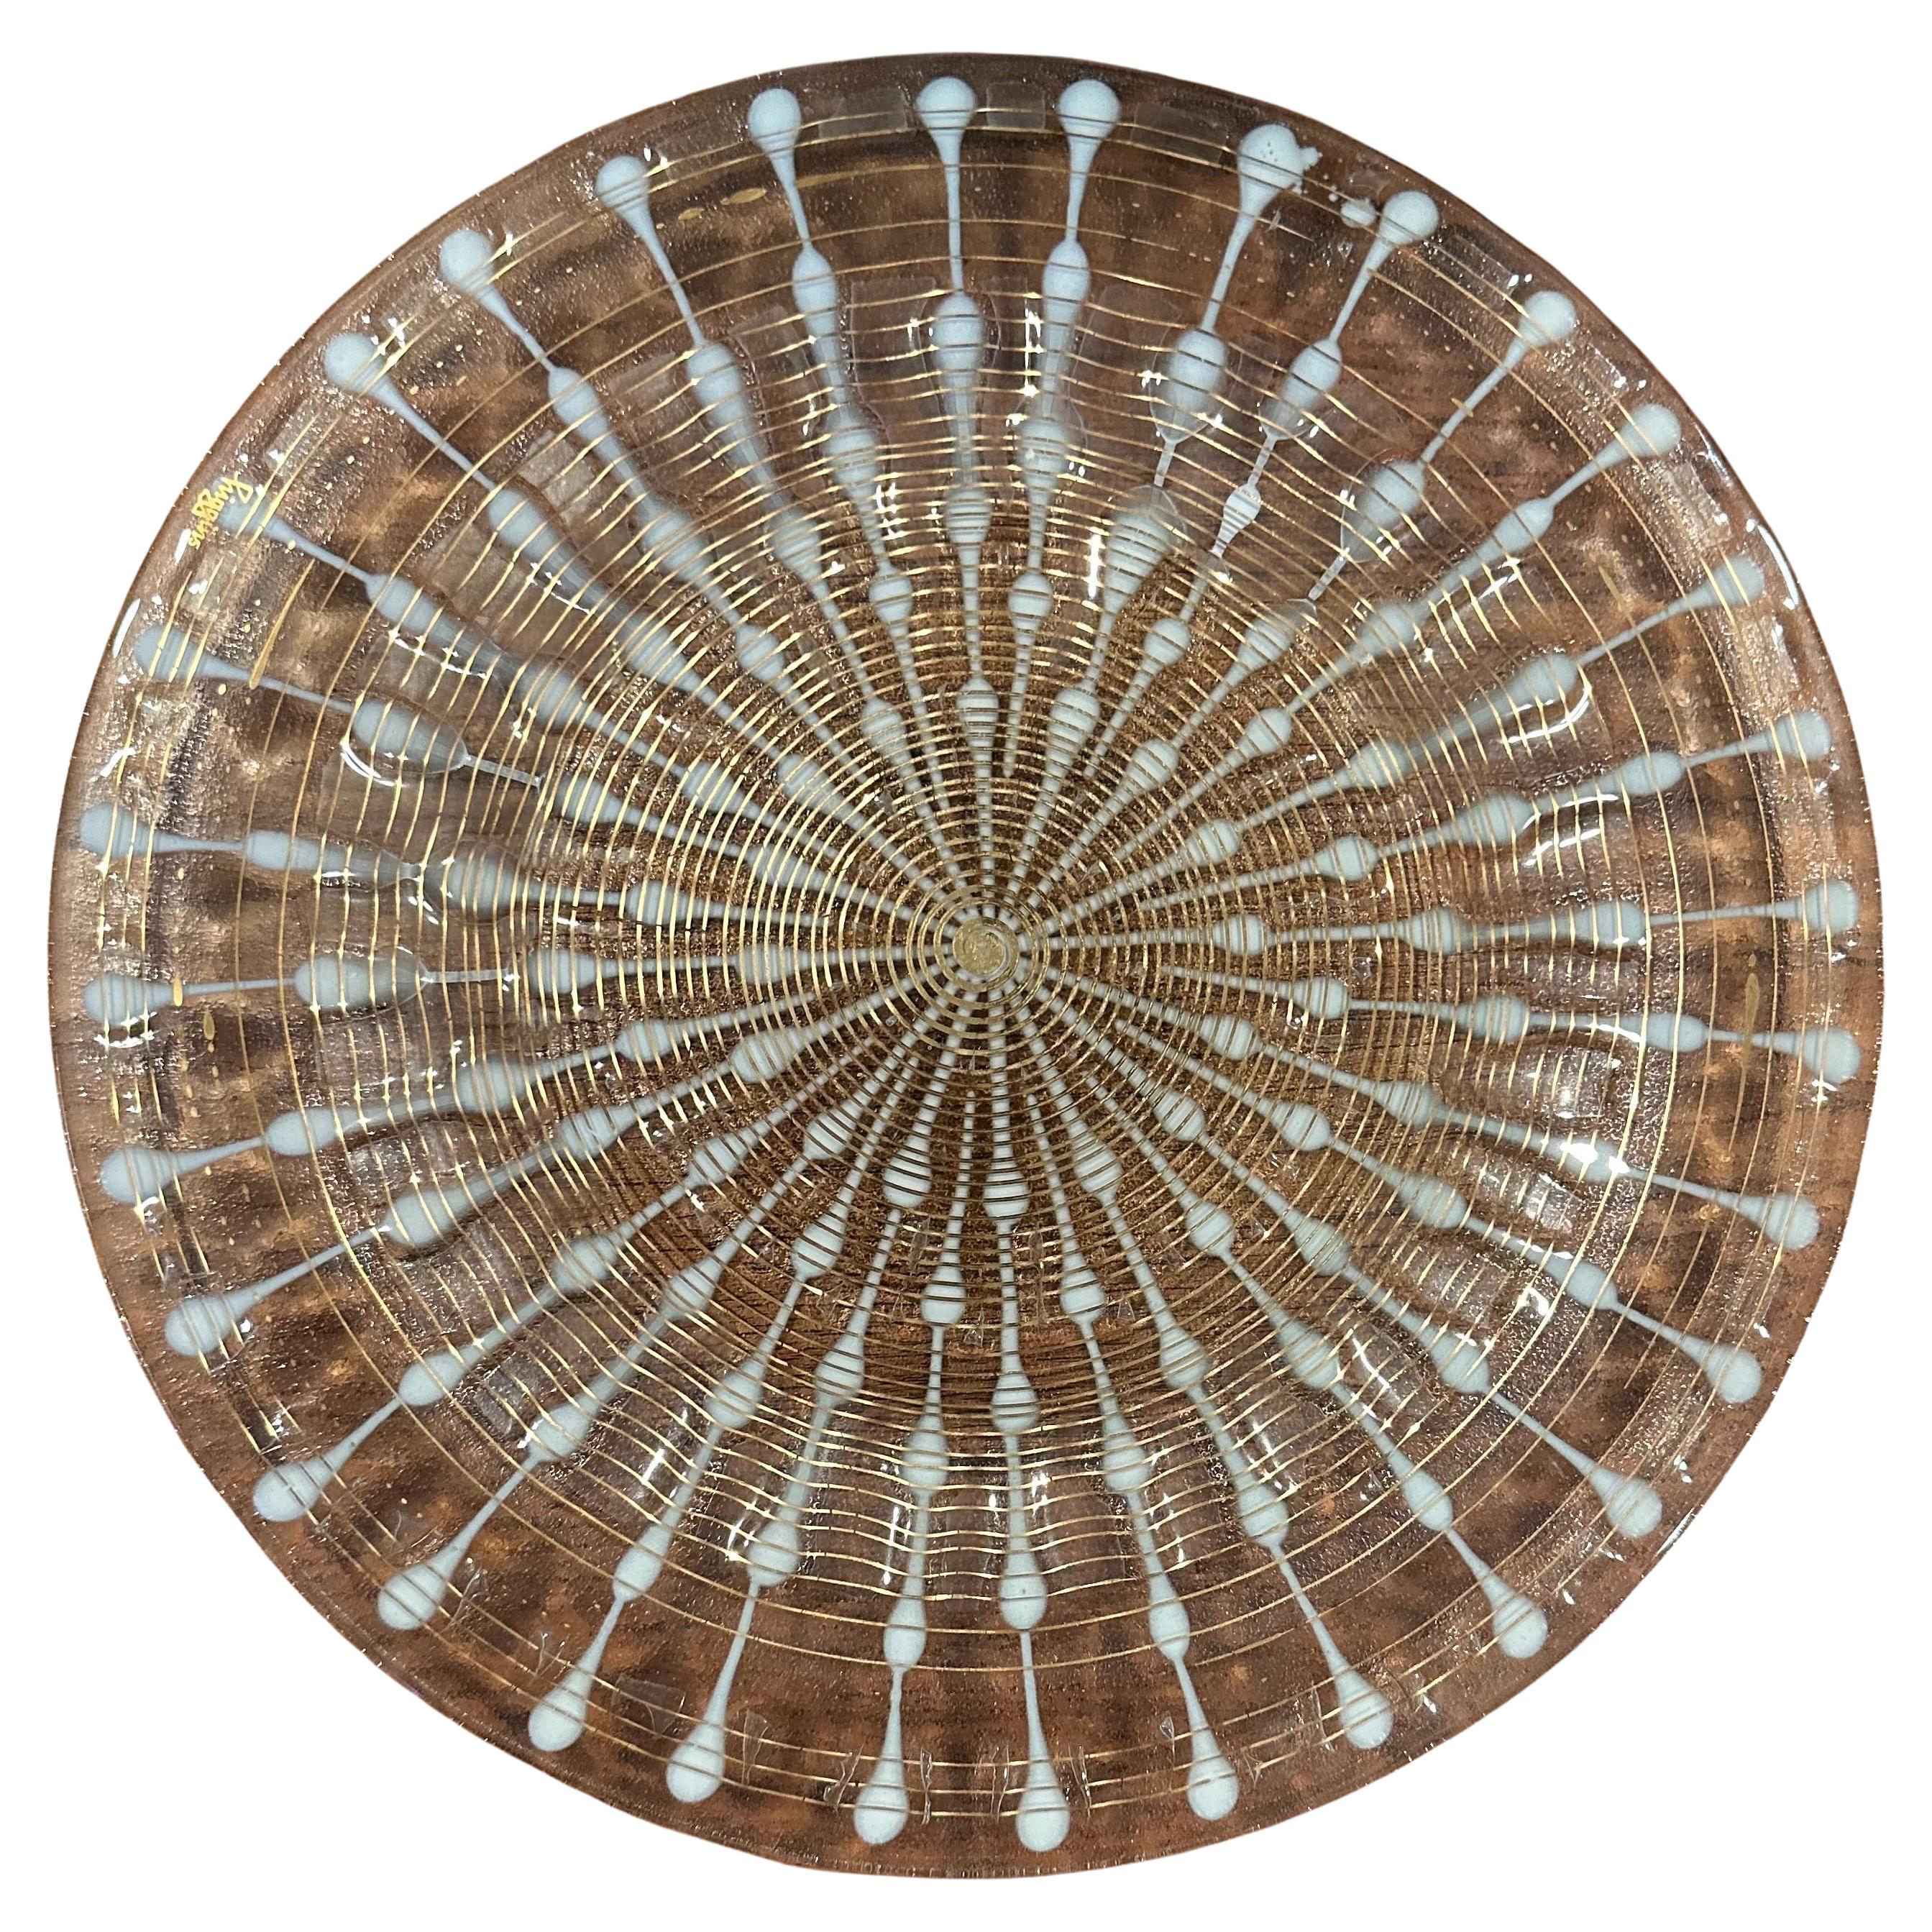 Large fused art glass atomic age round tray by Michael & Frances Higgins, circa 1950s. The piece is executed in the fused glass technique by the Higgins Studio and has a great atomic design.  The tray is in very good vintage condition with no chips